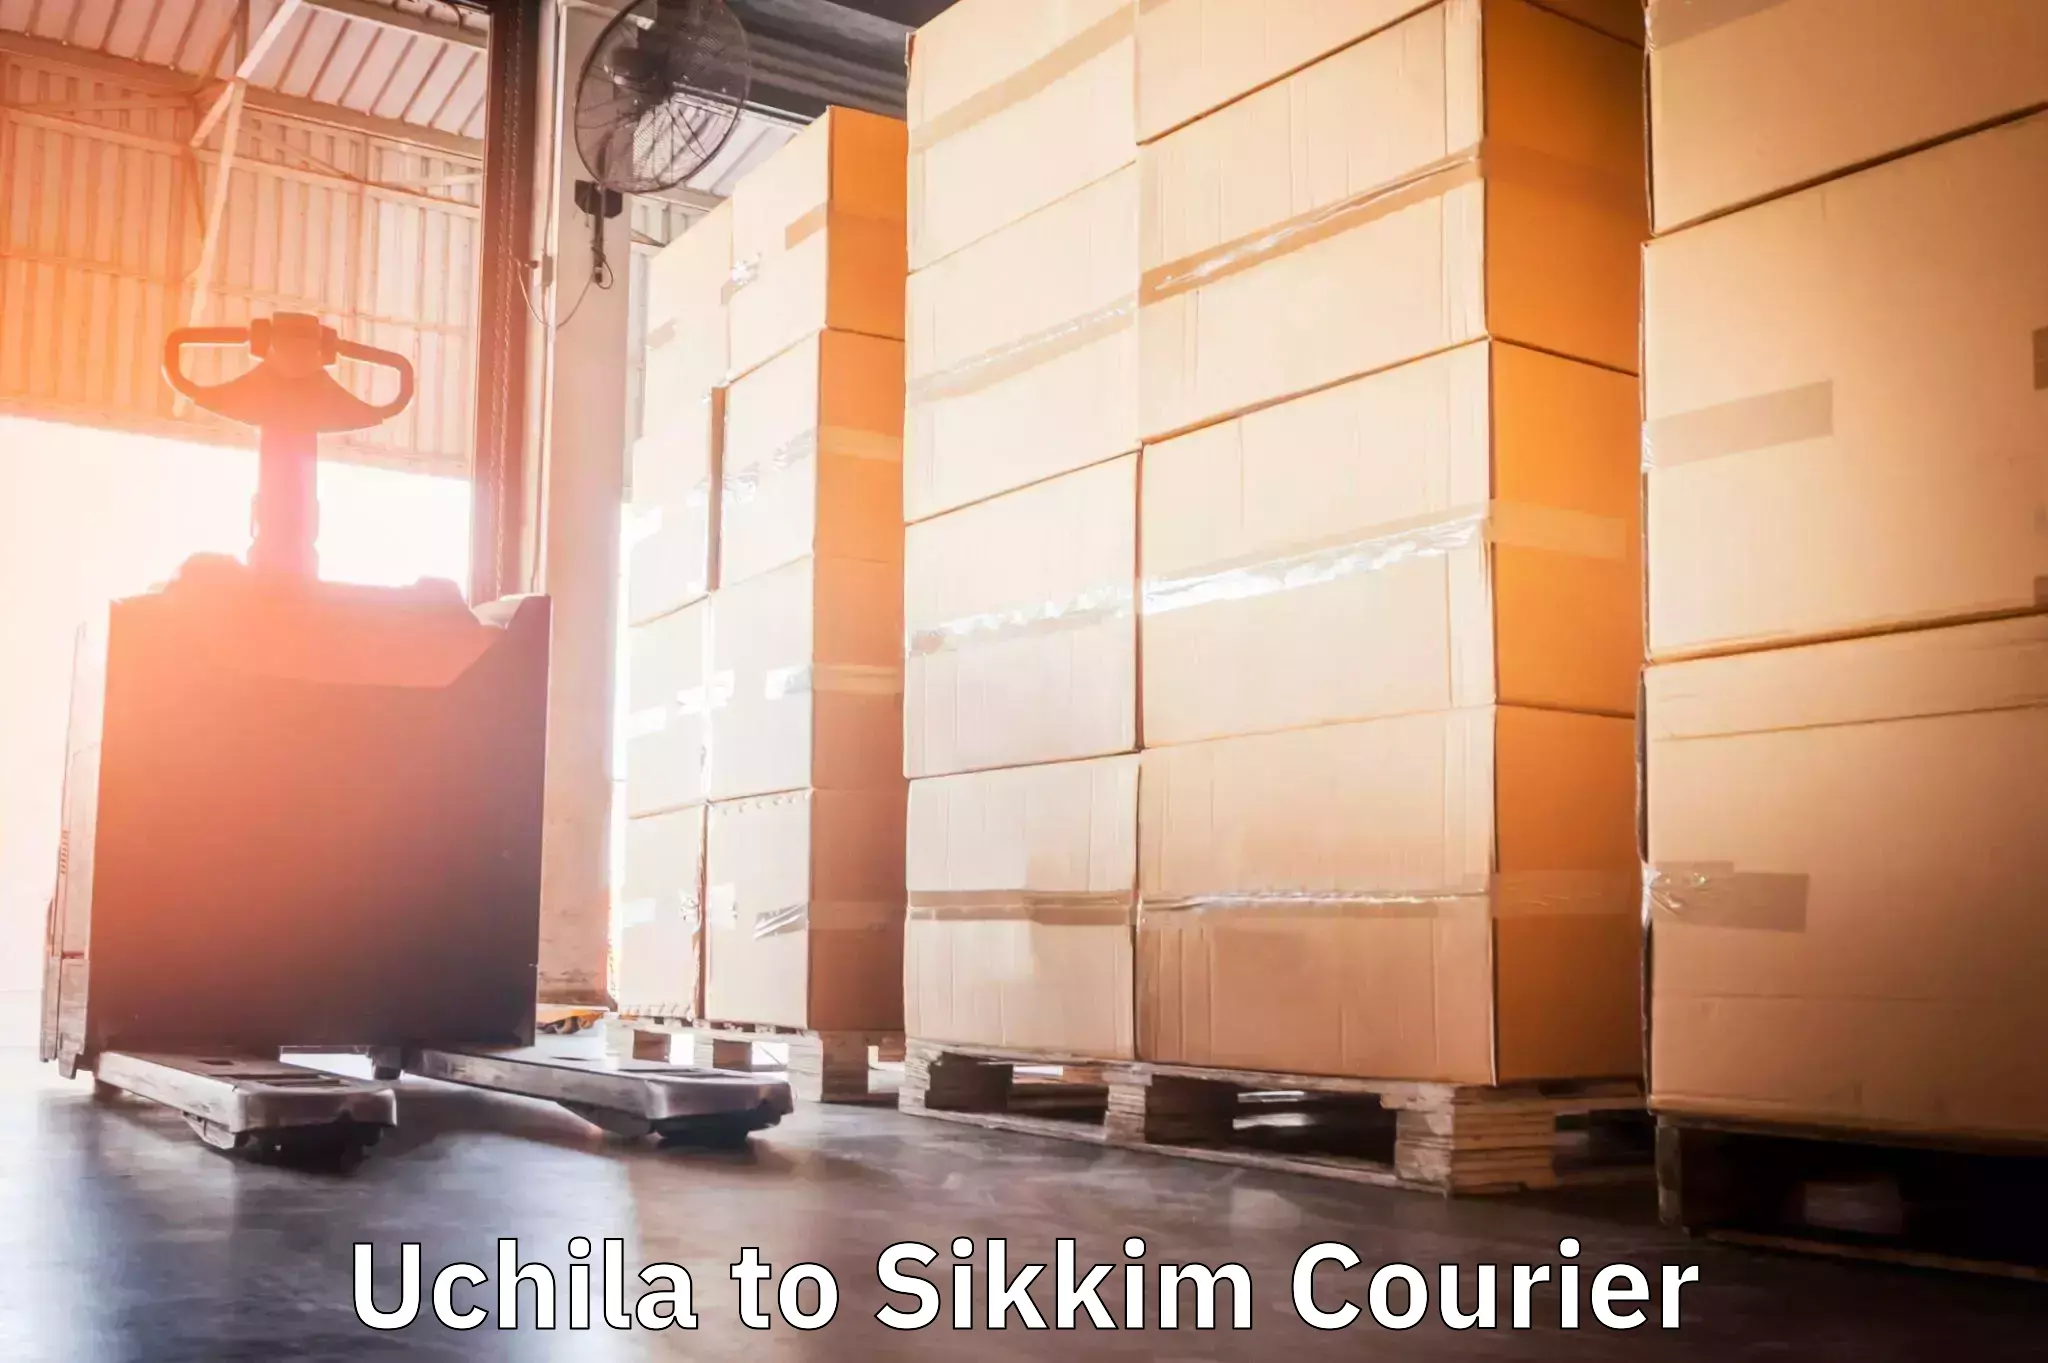 Sustainable courier practices Uchila to Pelling